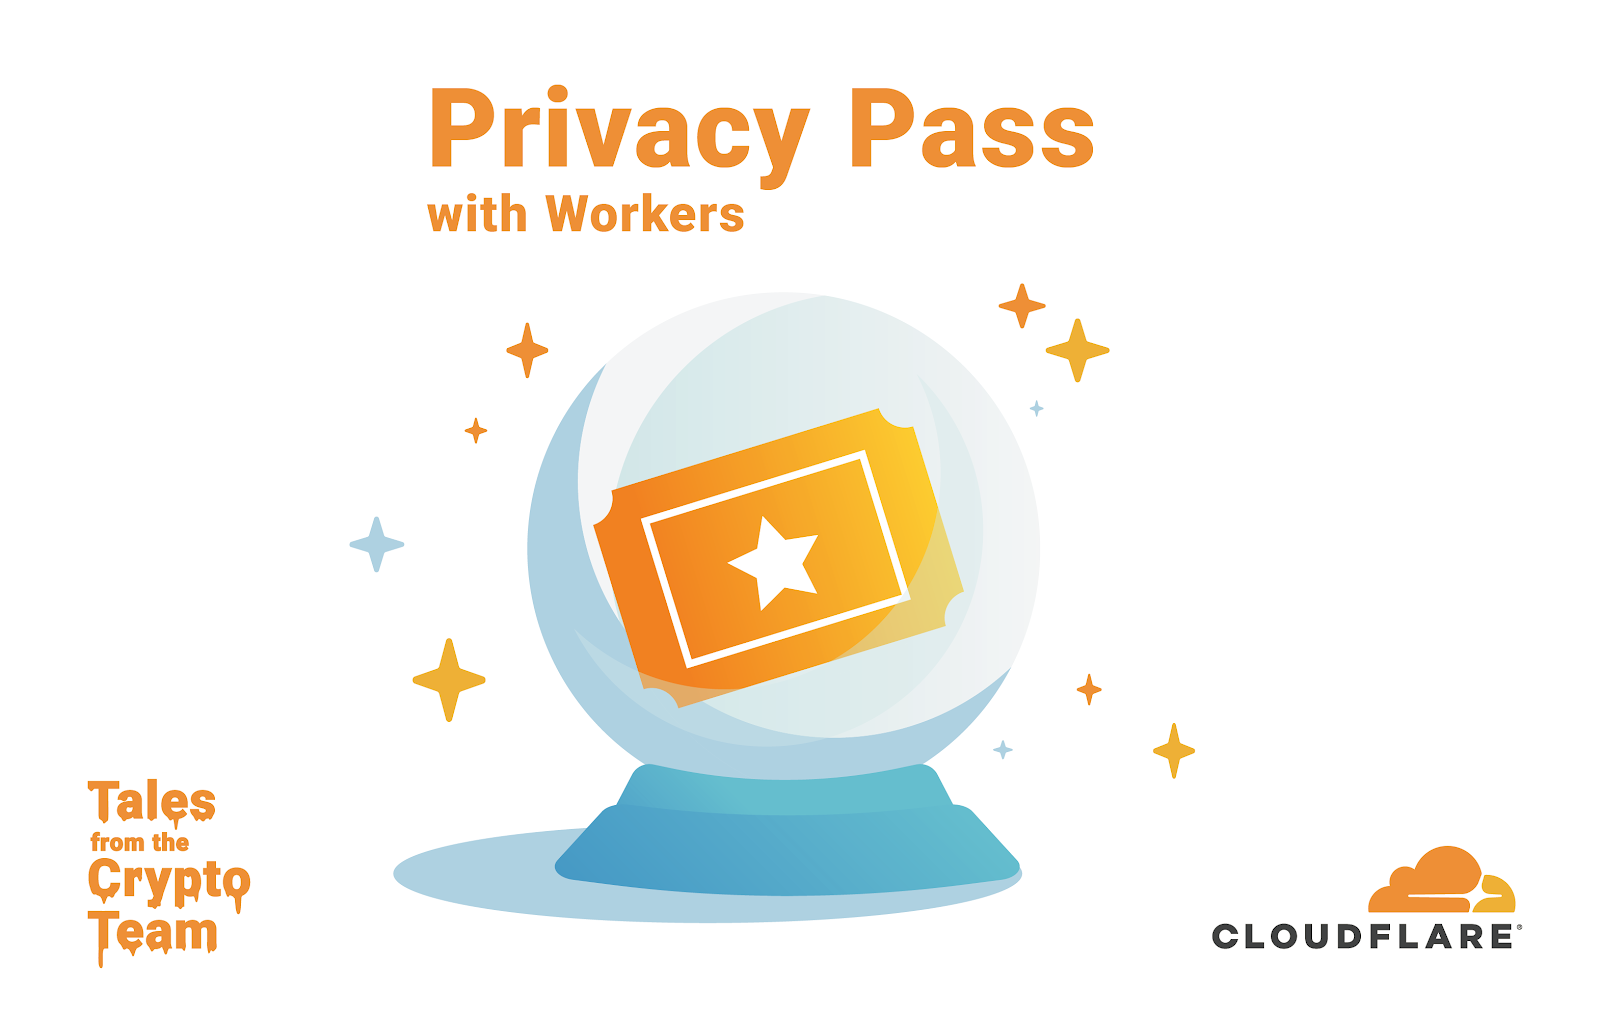 Supporting the latest version of the Privacy Pass Protocol